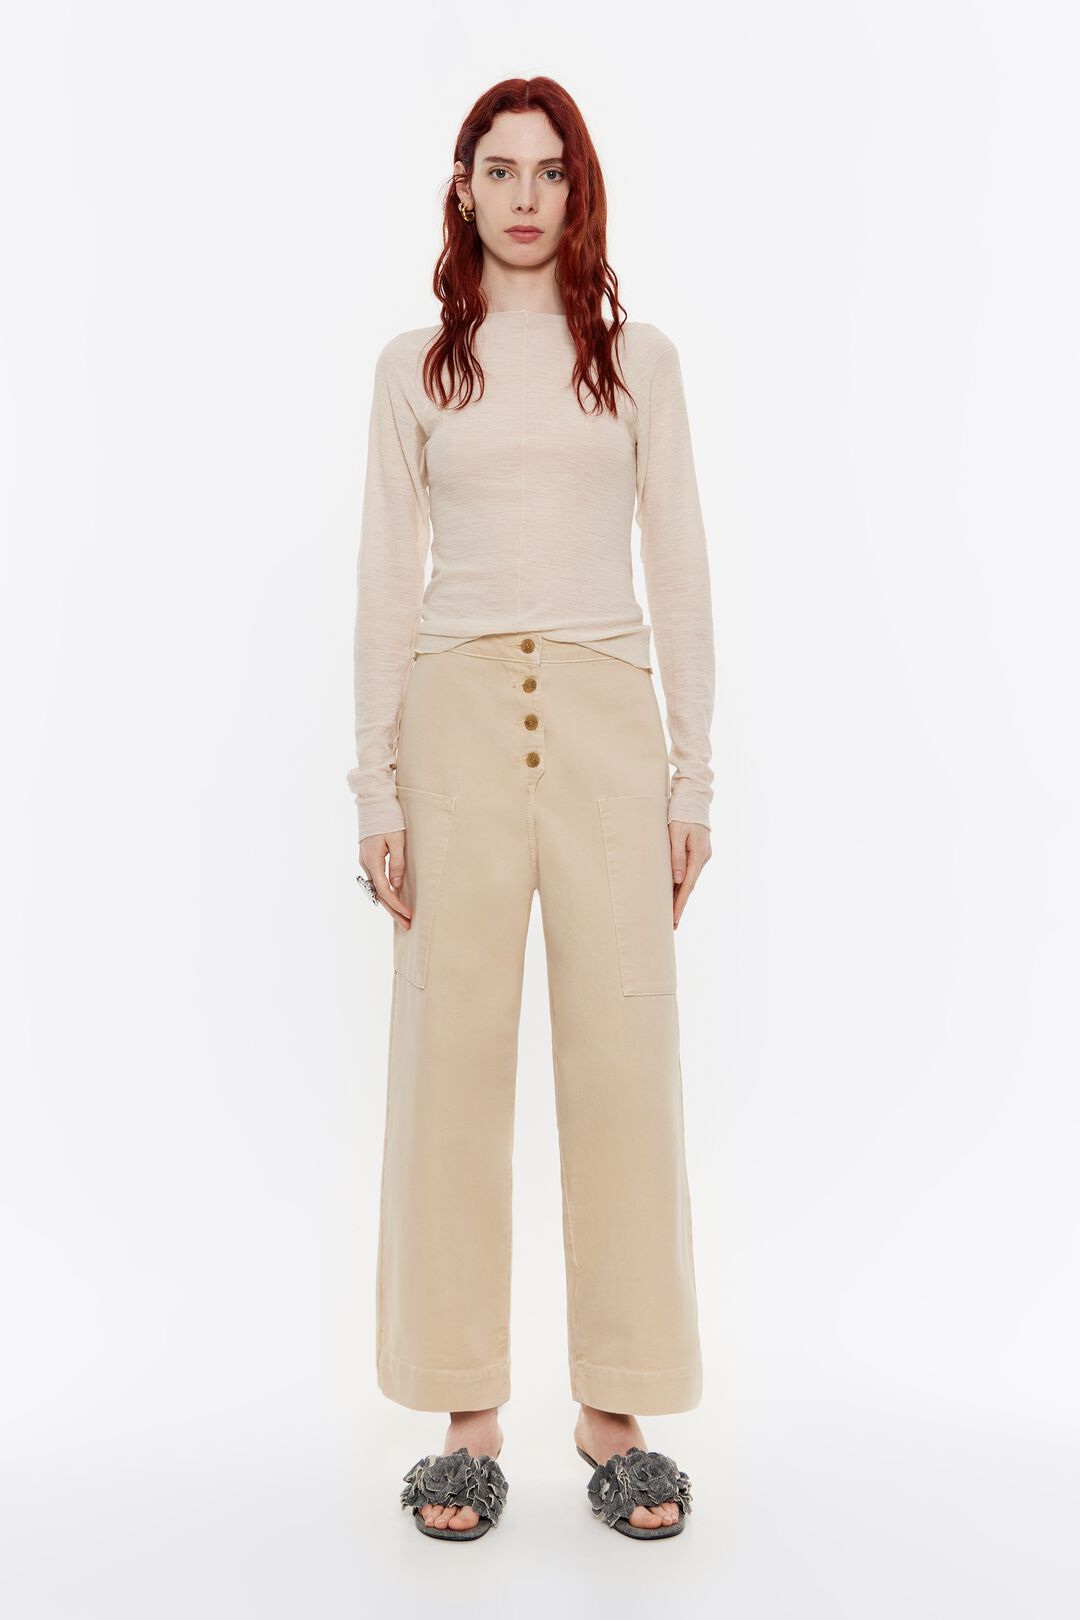 Beige straight ankle length trousers